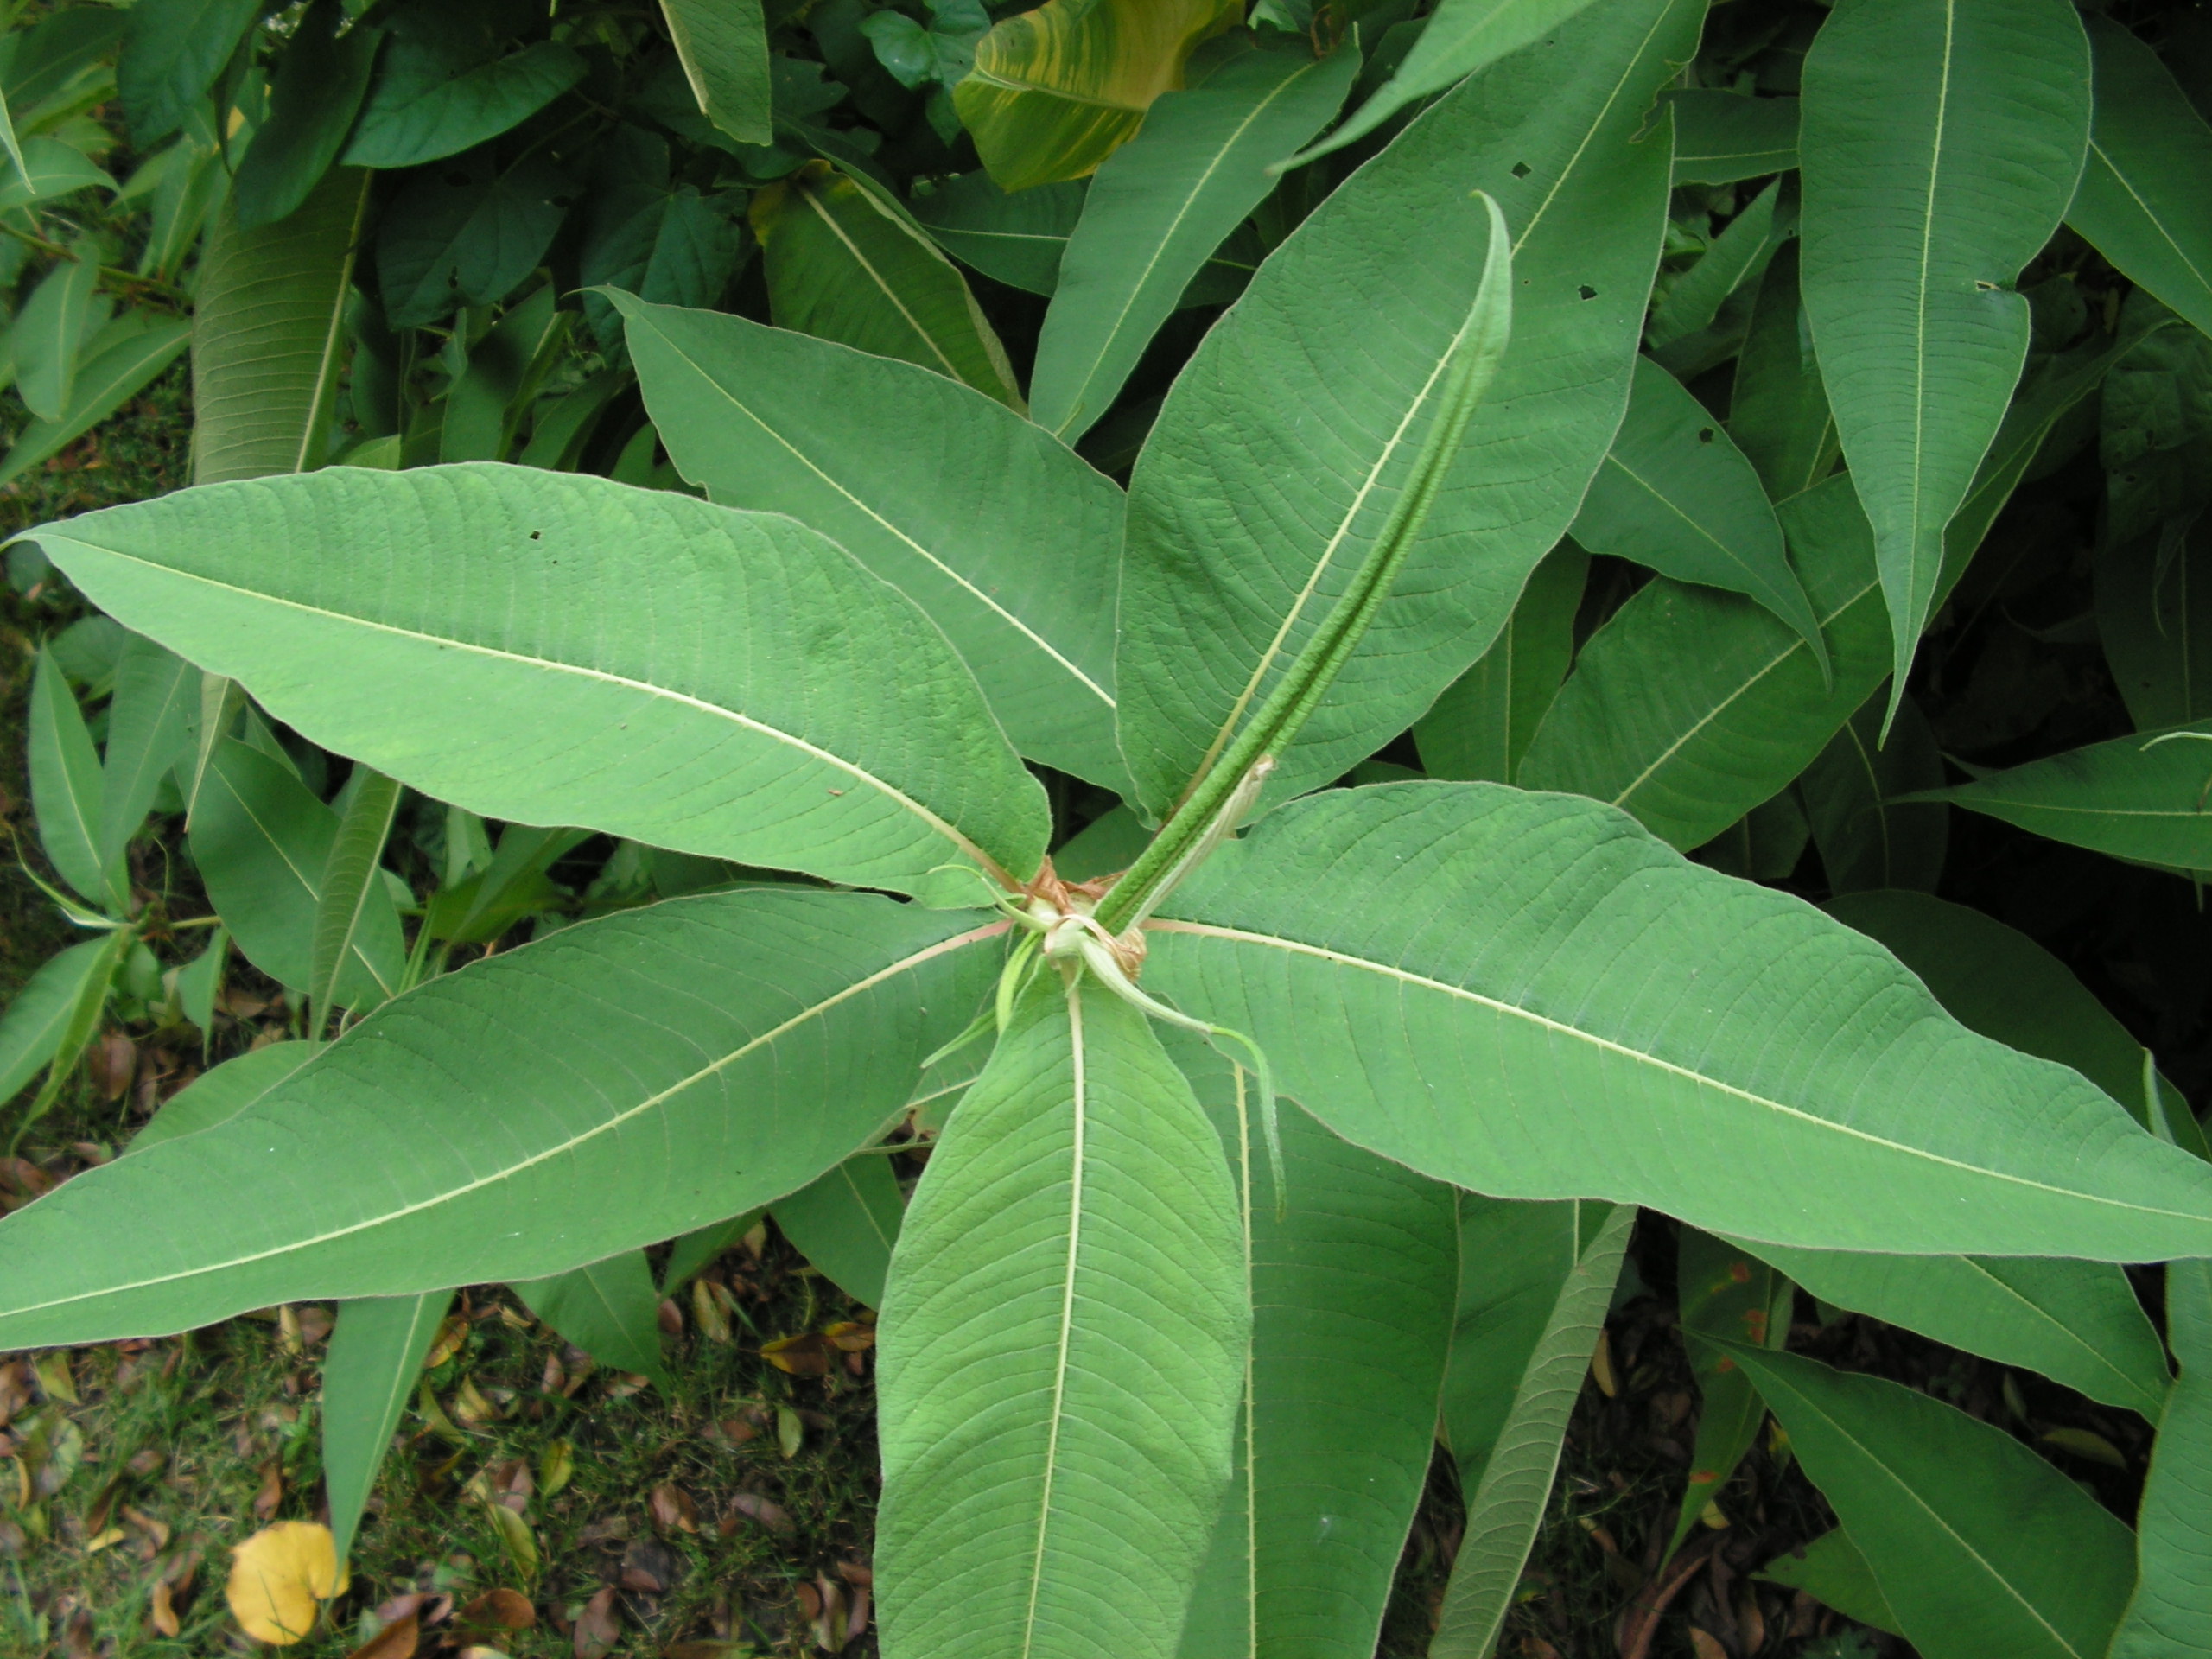 Example of HIMALAYAN knotweed leaves in star-shape pattern